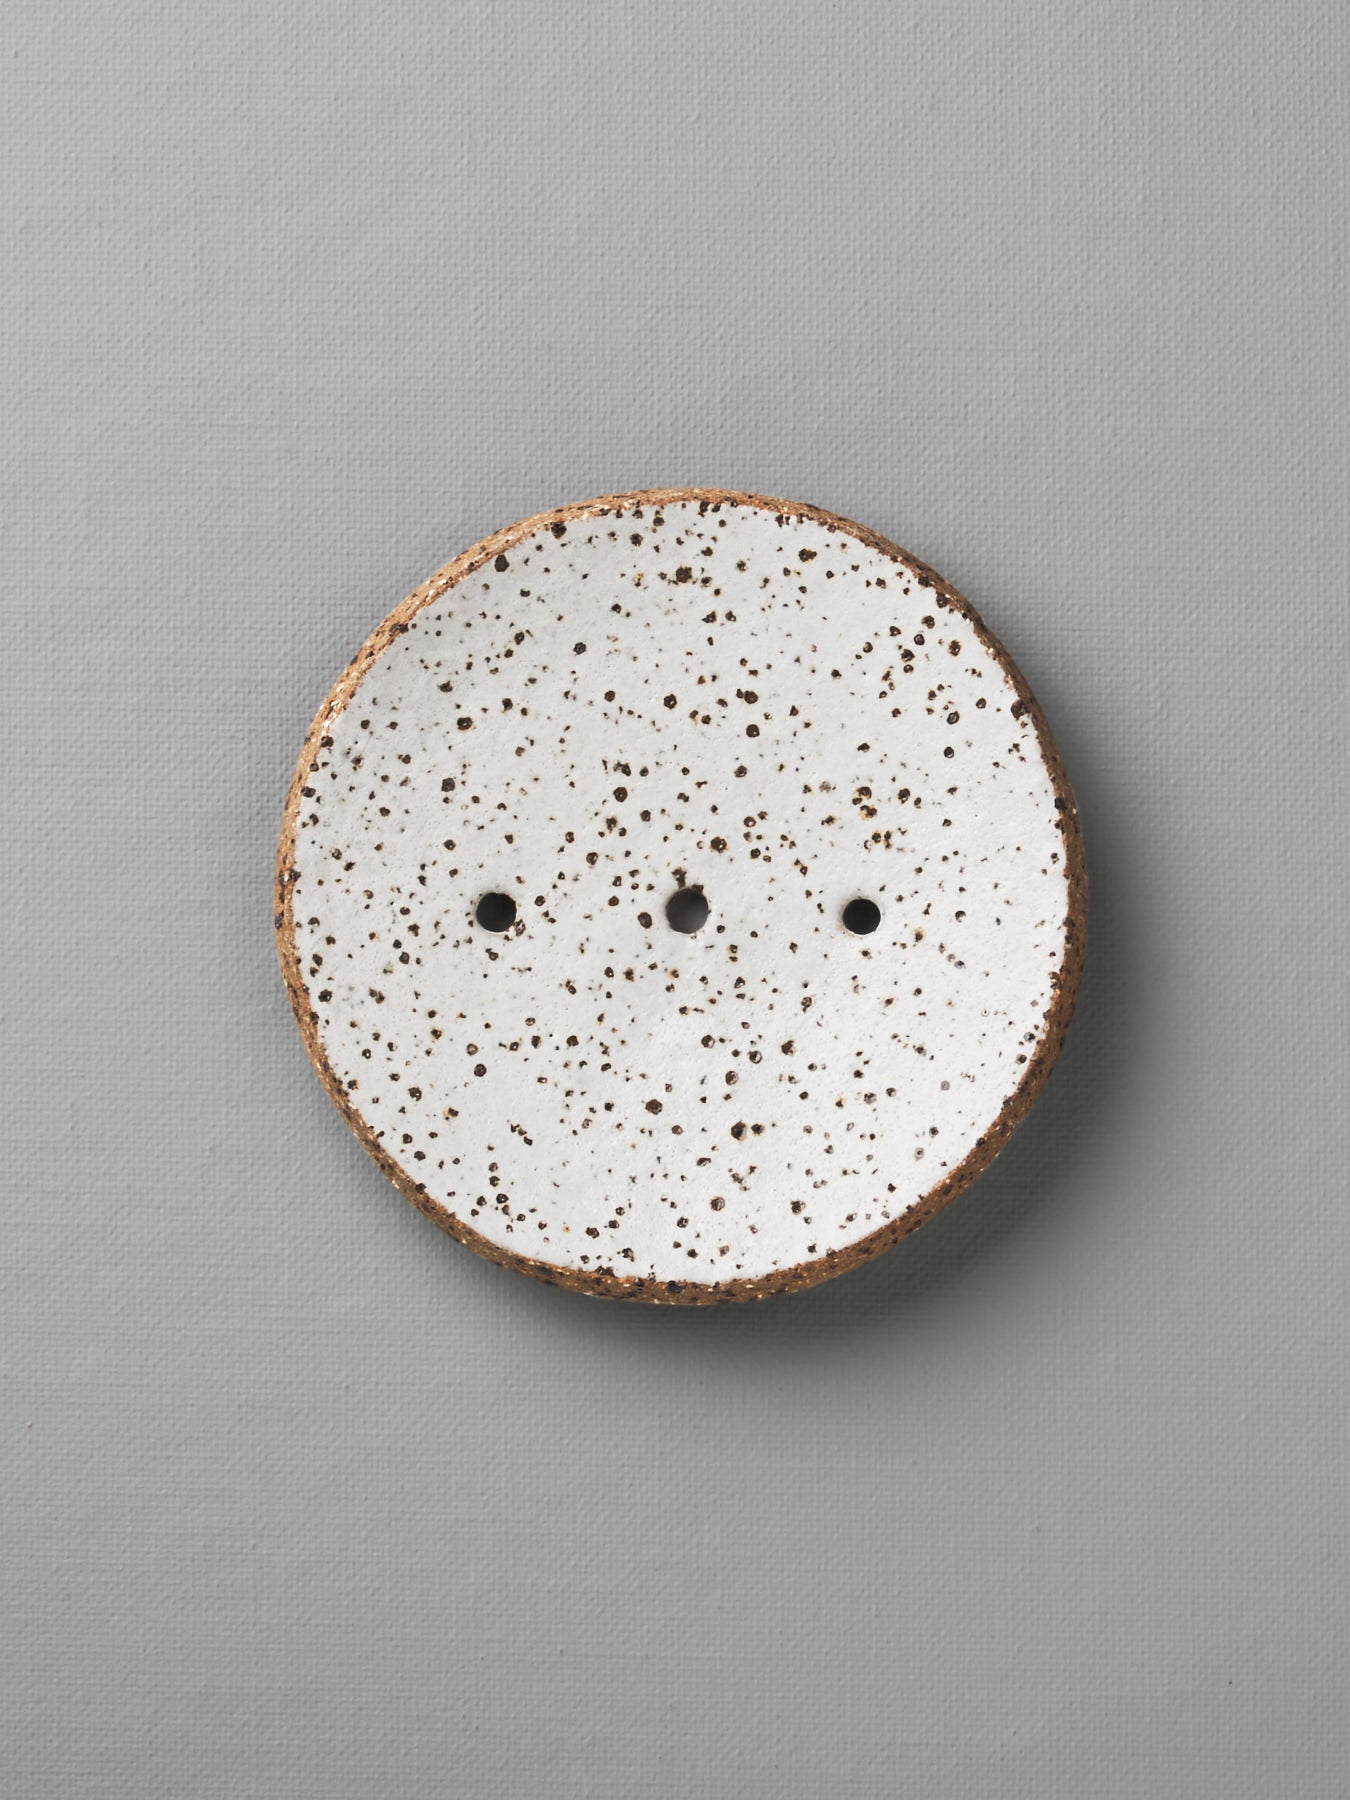 A Round Ceramic Soap Dish - White with Black Speckle from Studio Star.